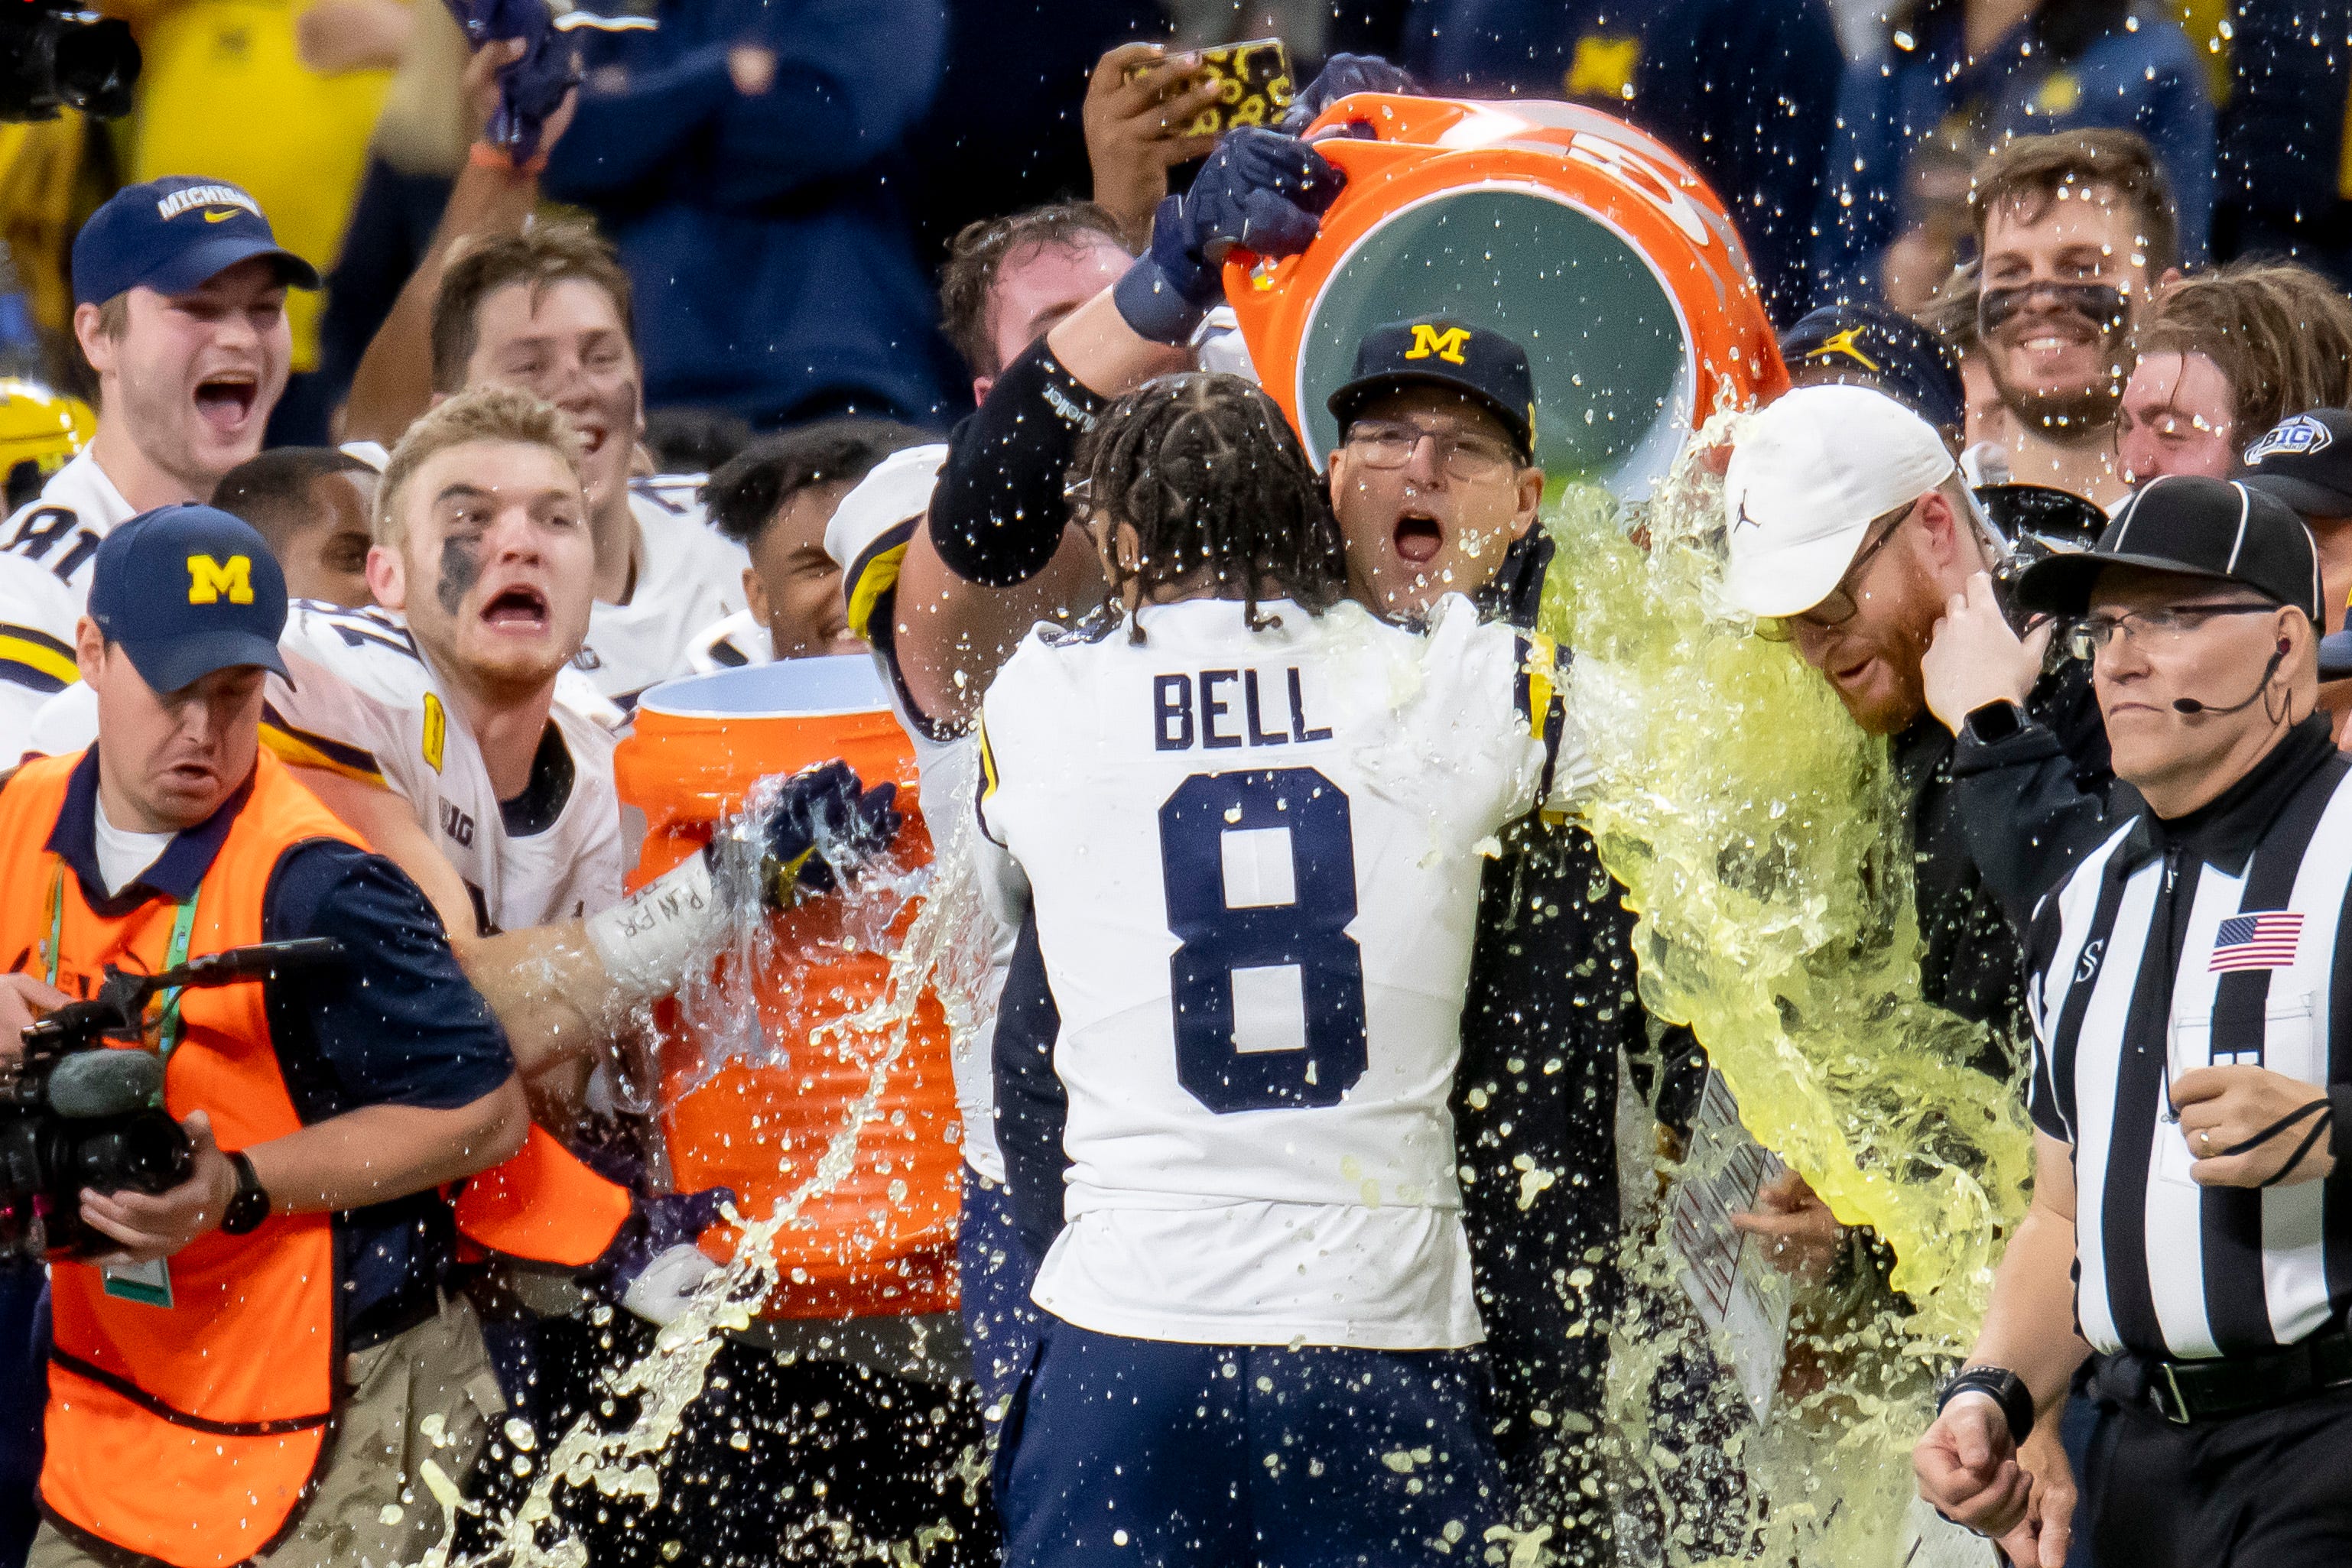 While getting a hug from wide receiver Ronnie Bell, head coach Jim Harbaugh gets doused with Gatorade during the final moments of the fourth quarter. Michigan defeated Iowa, 42-3, in the Big Ten Championship Game, December 4, 2021, at Indianapolis.